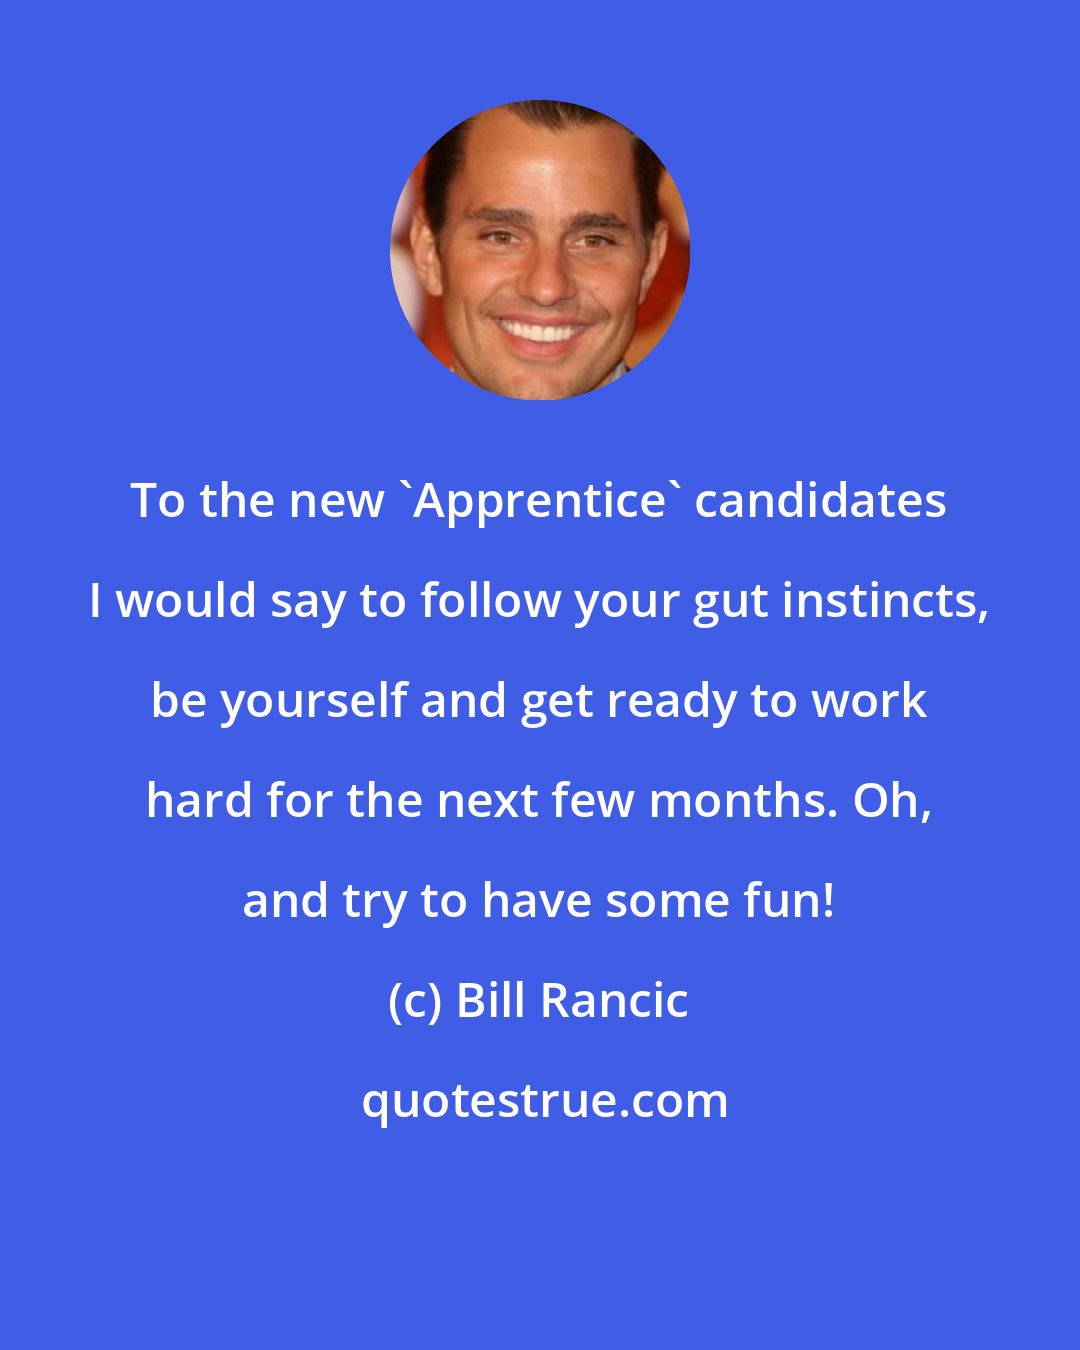 Bill Rancic: To the new 'Apprentice' candidates I would say to follow your gut instincts, be yourself and get ready to work hard for the next few months. Oh, and try to have some fun!